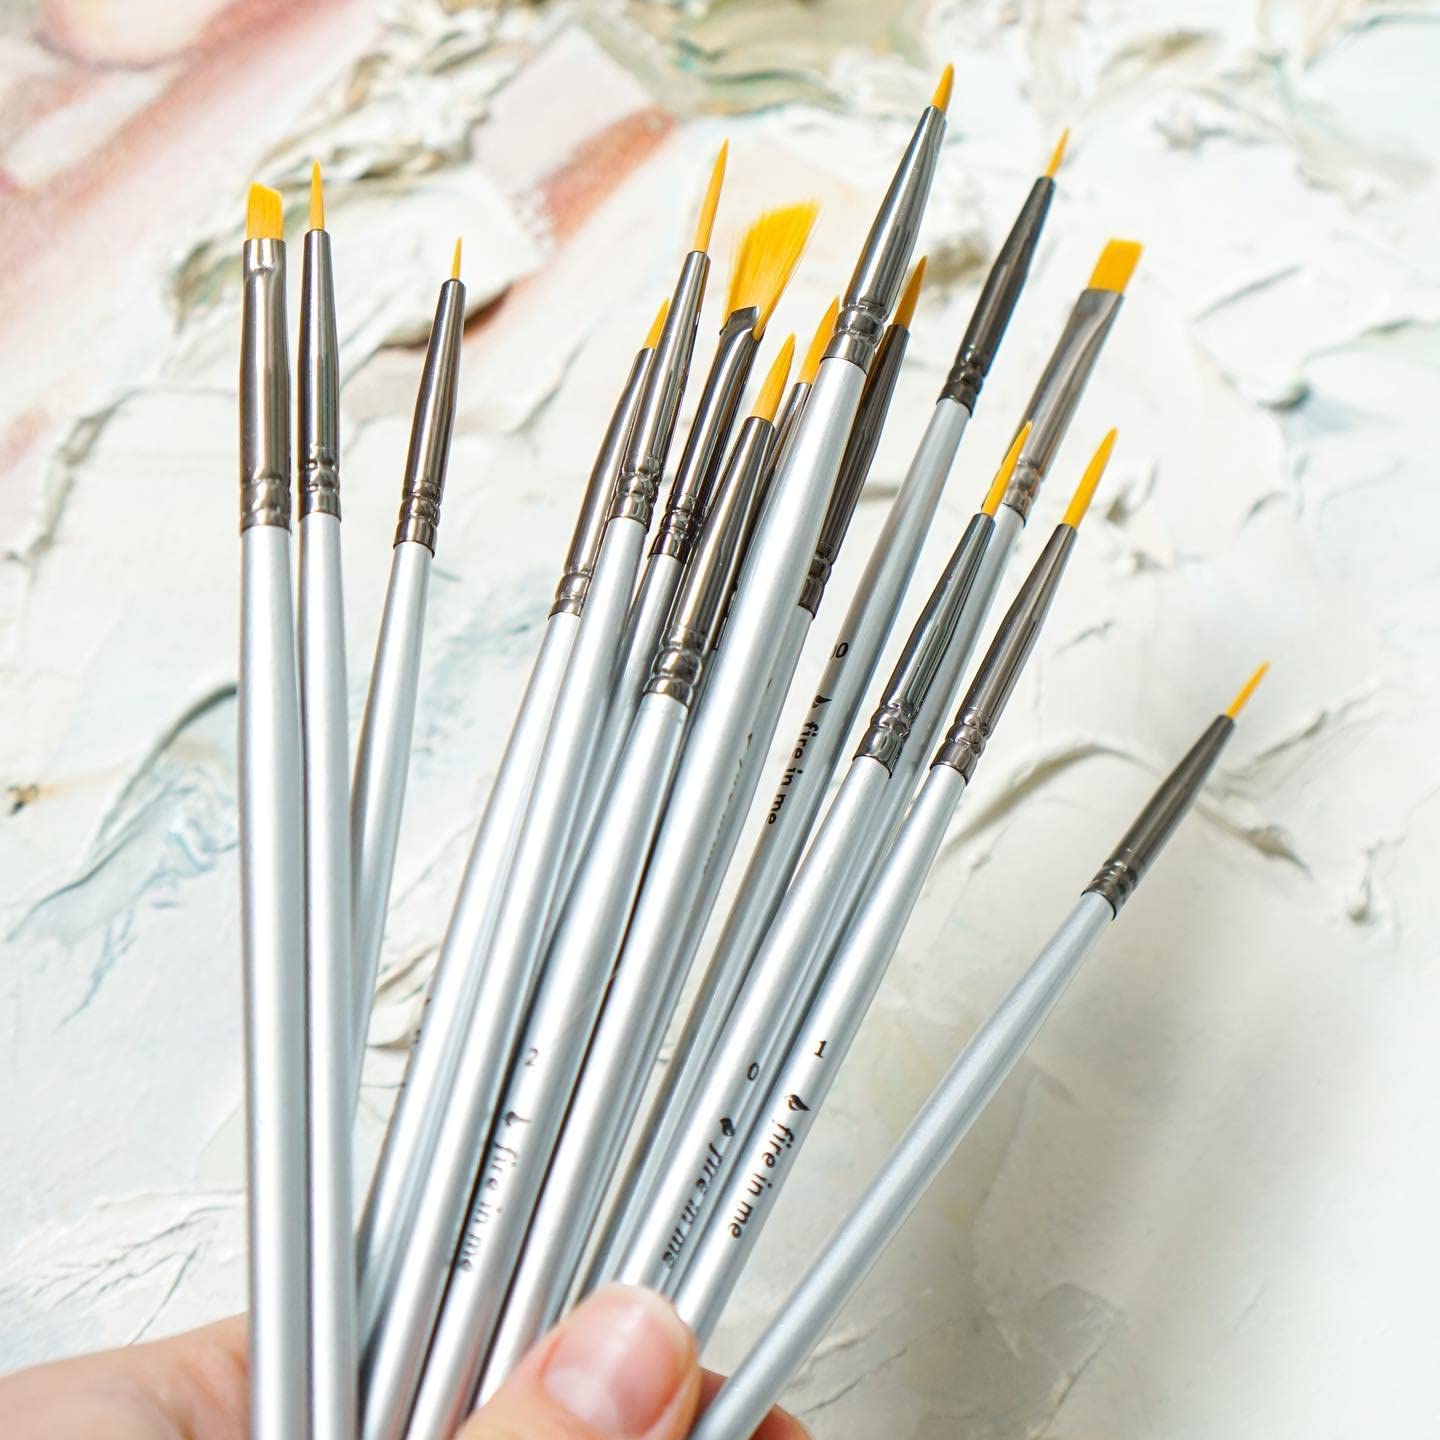 MEEDEN Miniature Paint Brush Set,15 Tiny Professional Fine Tip Detail Paint  Brushes, Detailing Paintbrushes for Acrylic Watercolor Oil Painting- Model